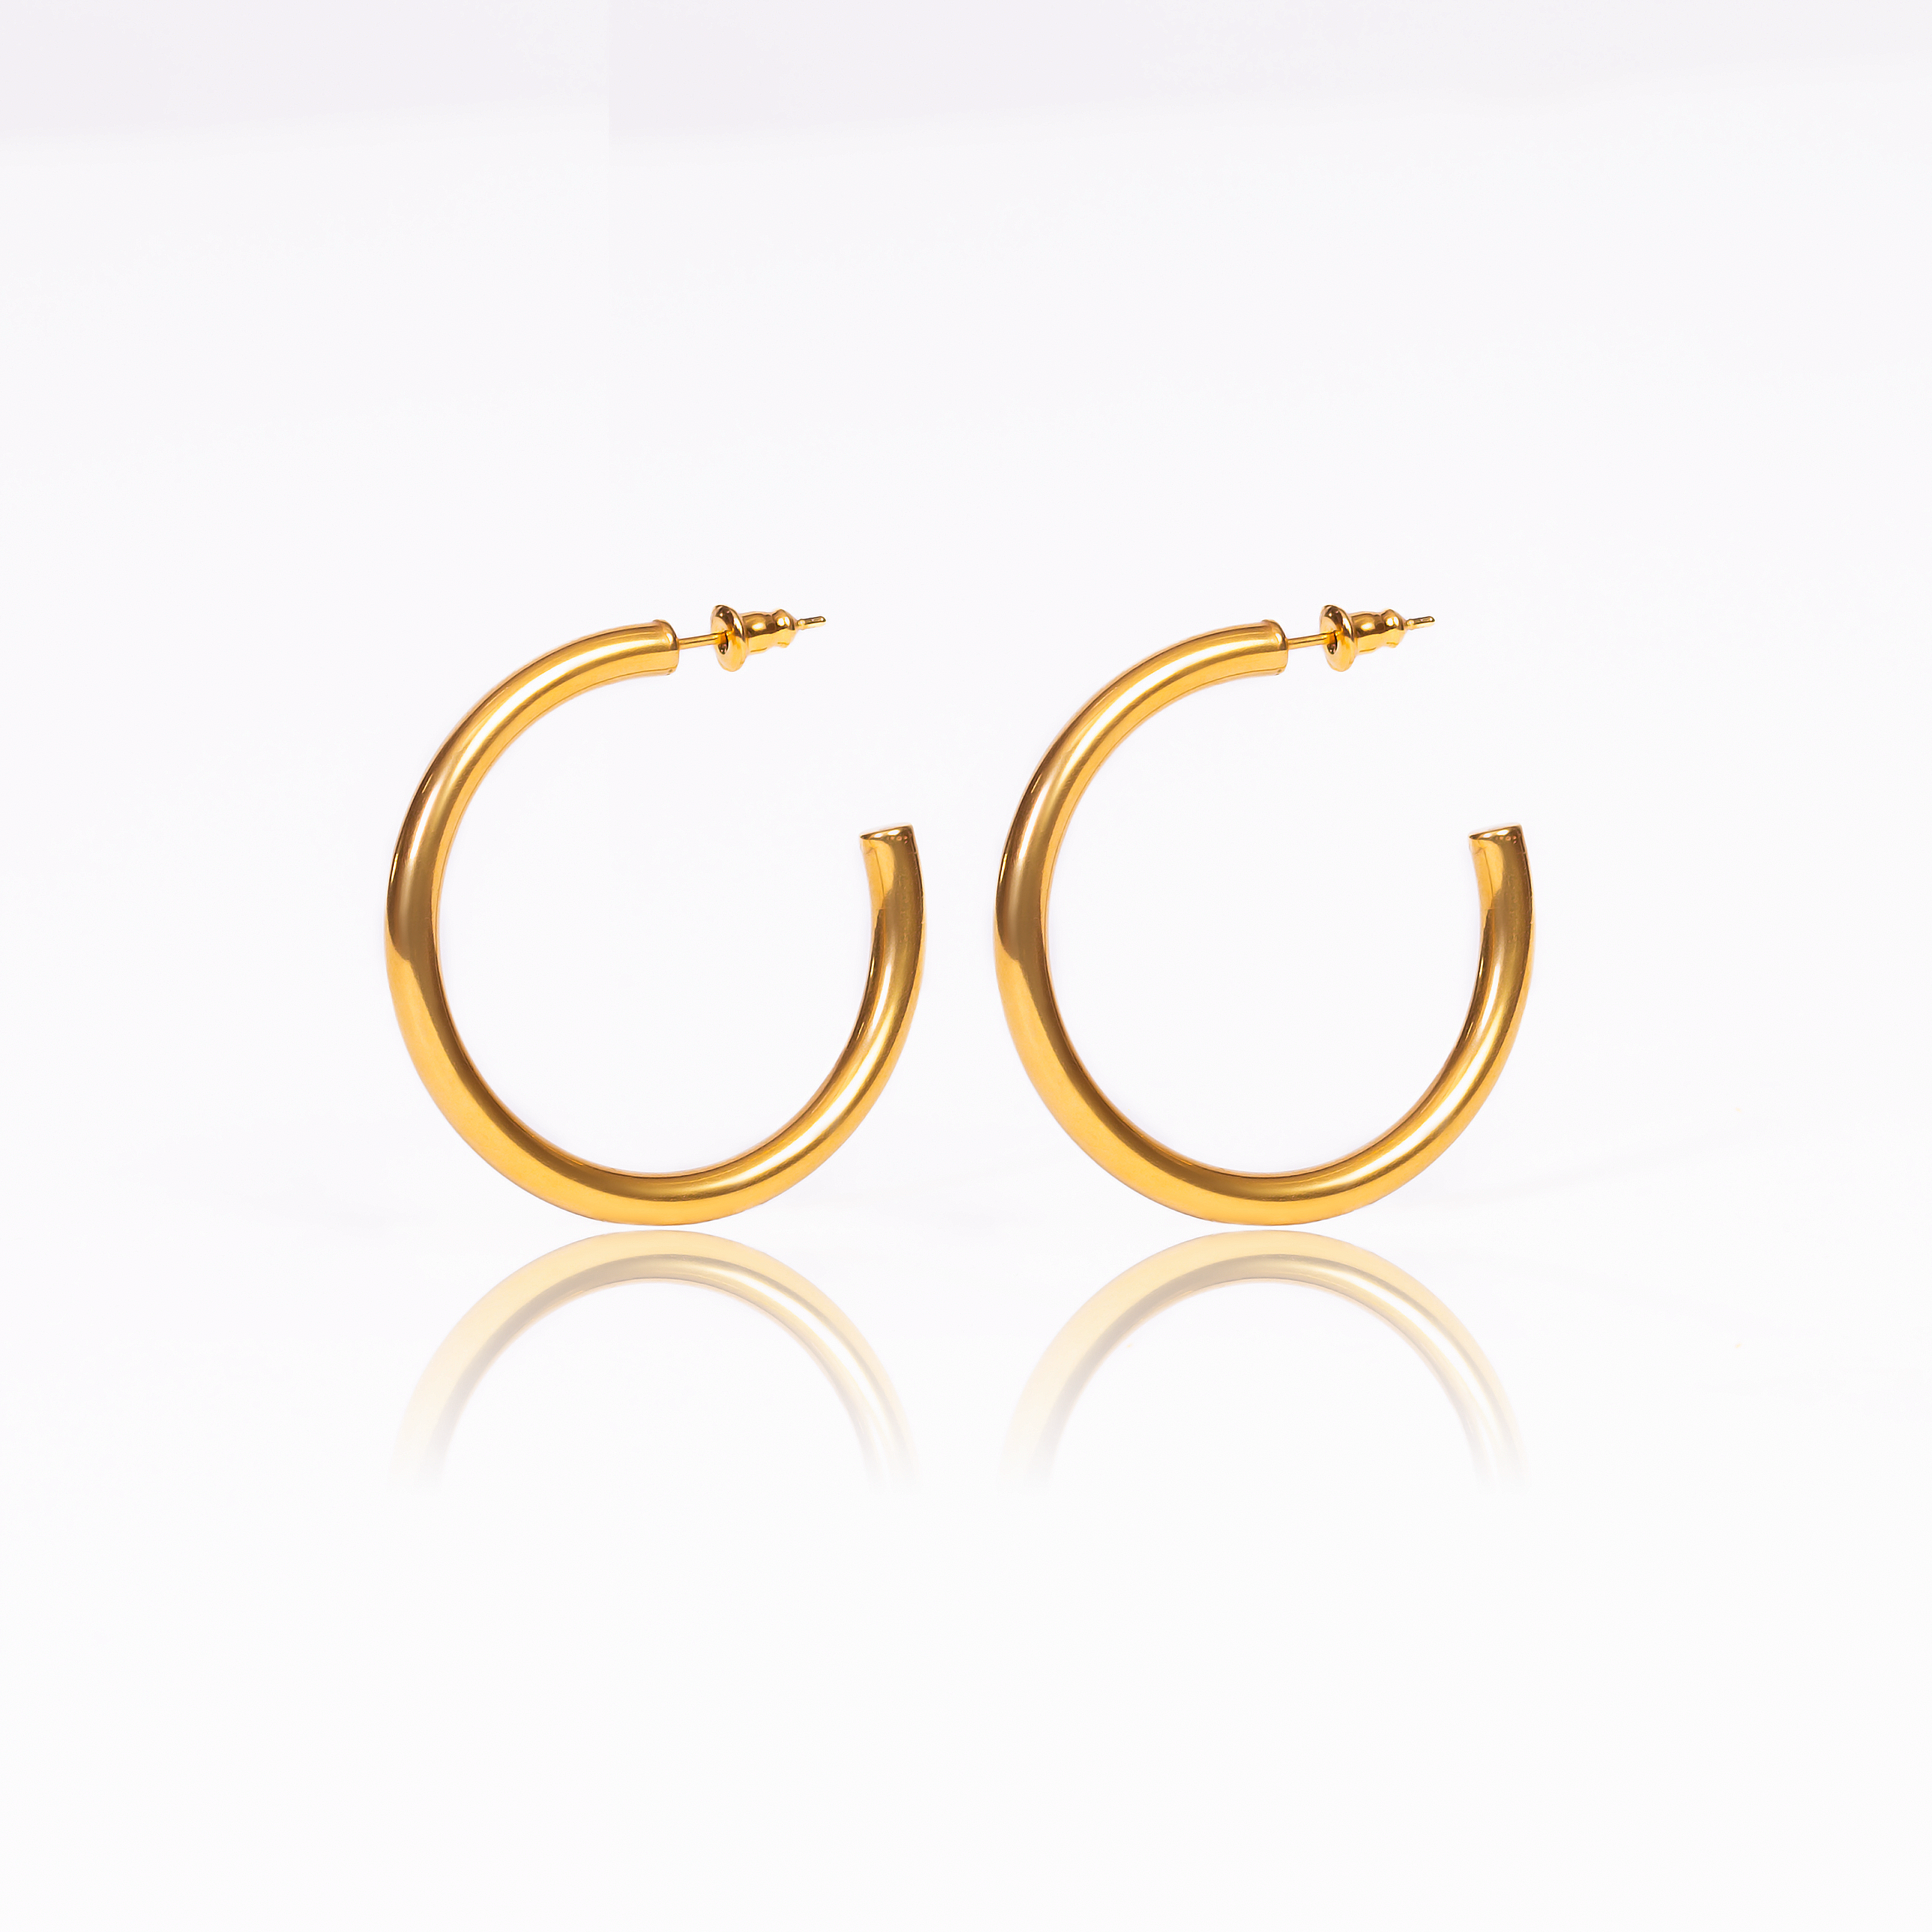 This pair of hoop earrings is the perfect piece to add a classy touch to any outfit. They're a timeless accessory that brings a touch of glamour to everything you dress up or down.  18K gold plated on stainless steel. Hoop size: 42mm